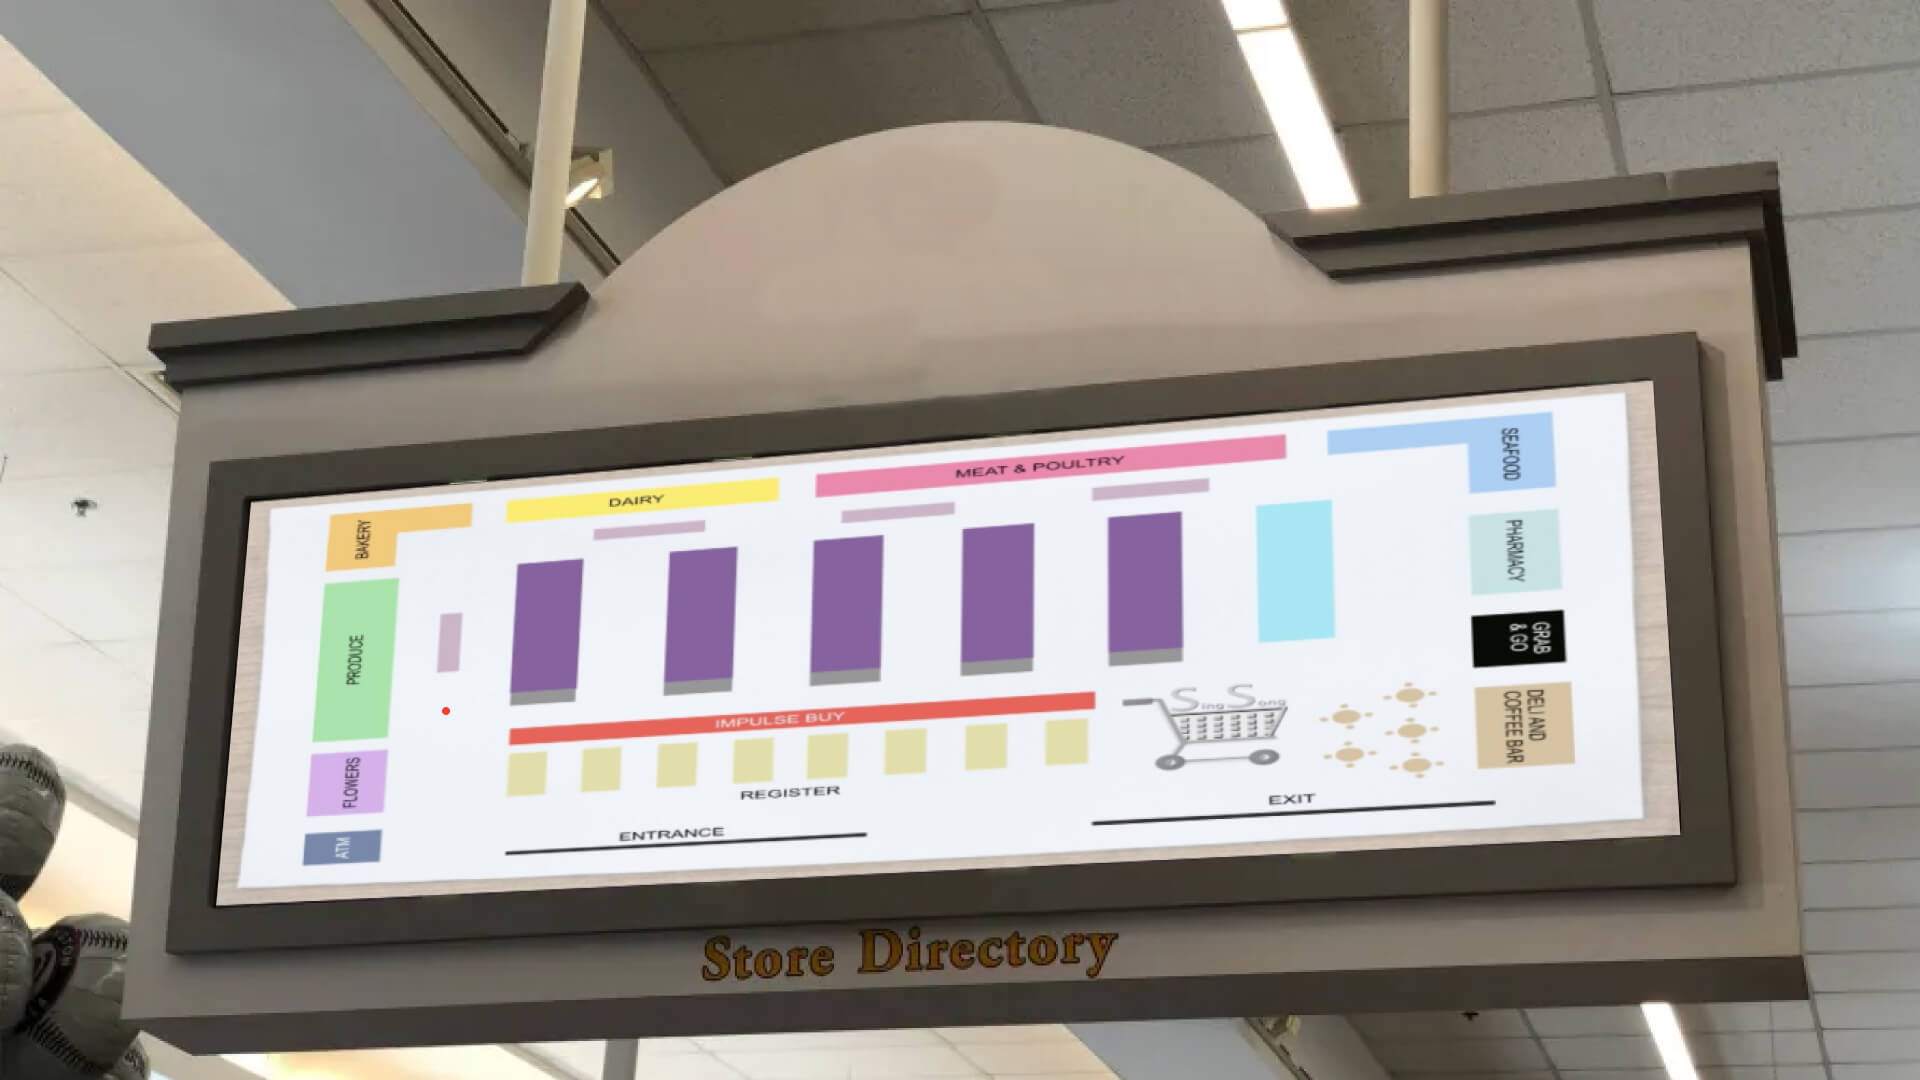 A hanging convenience store digital signage shows an in-store wayfinding map with all store aisles & segments 